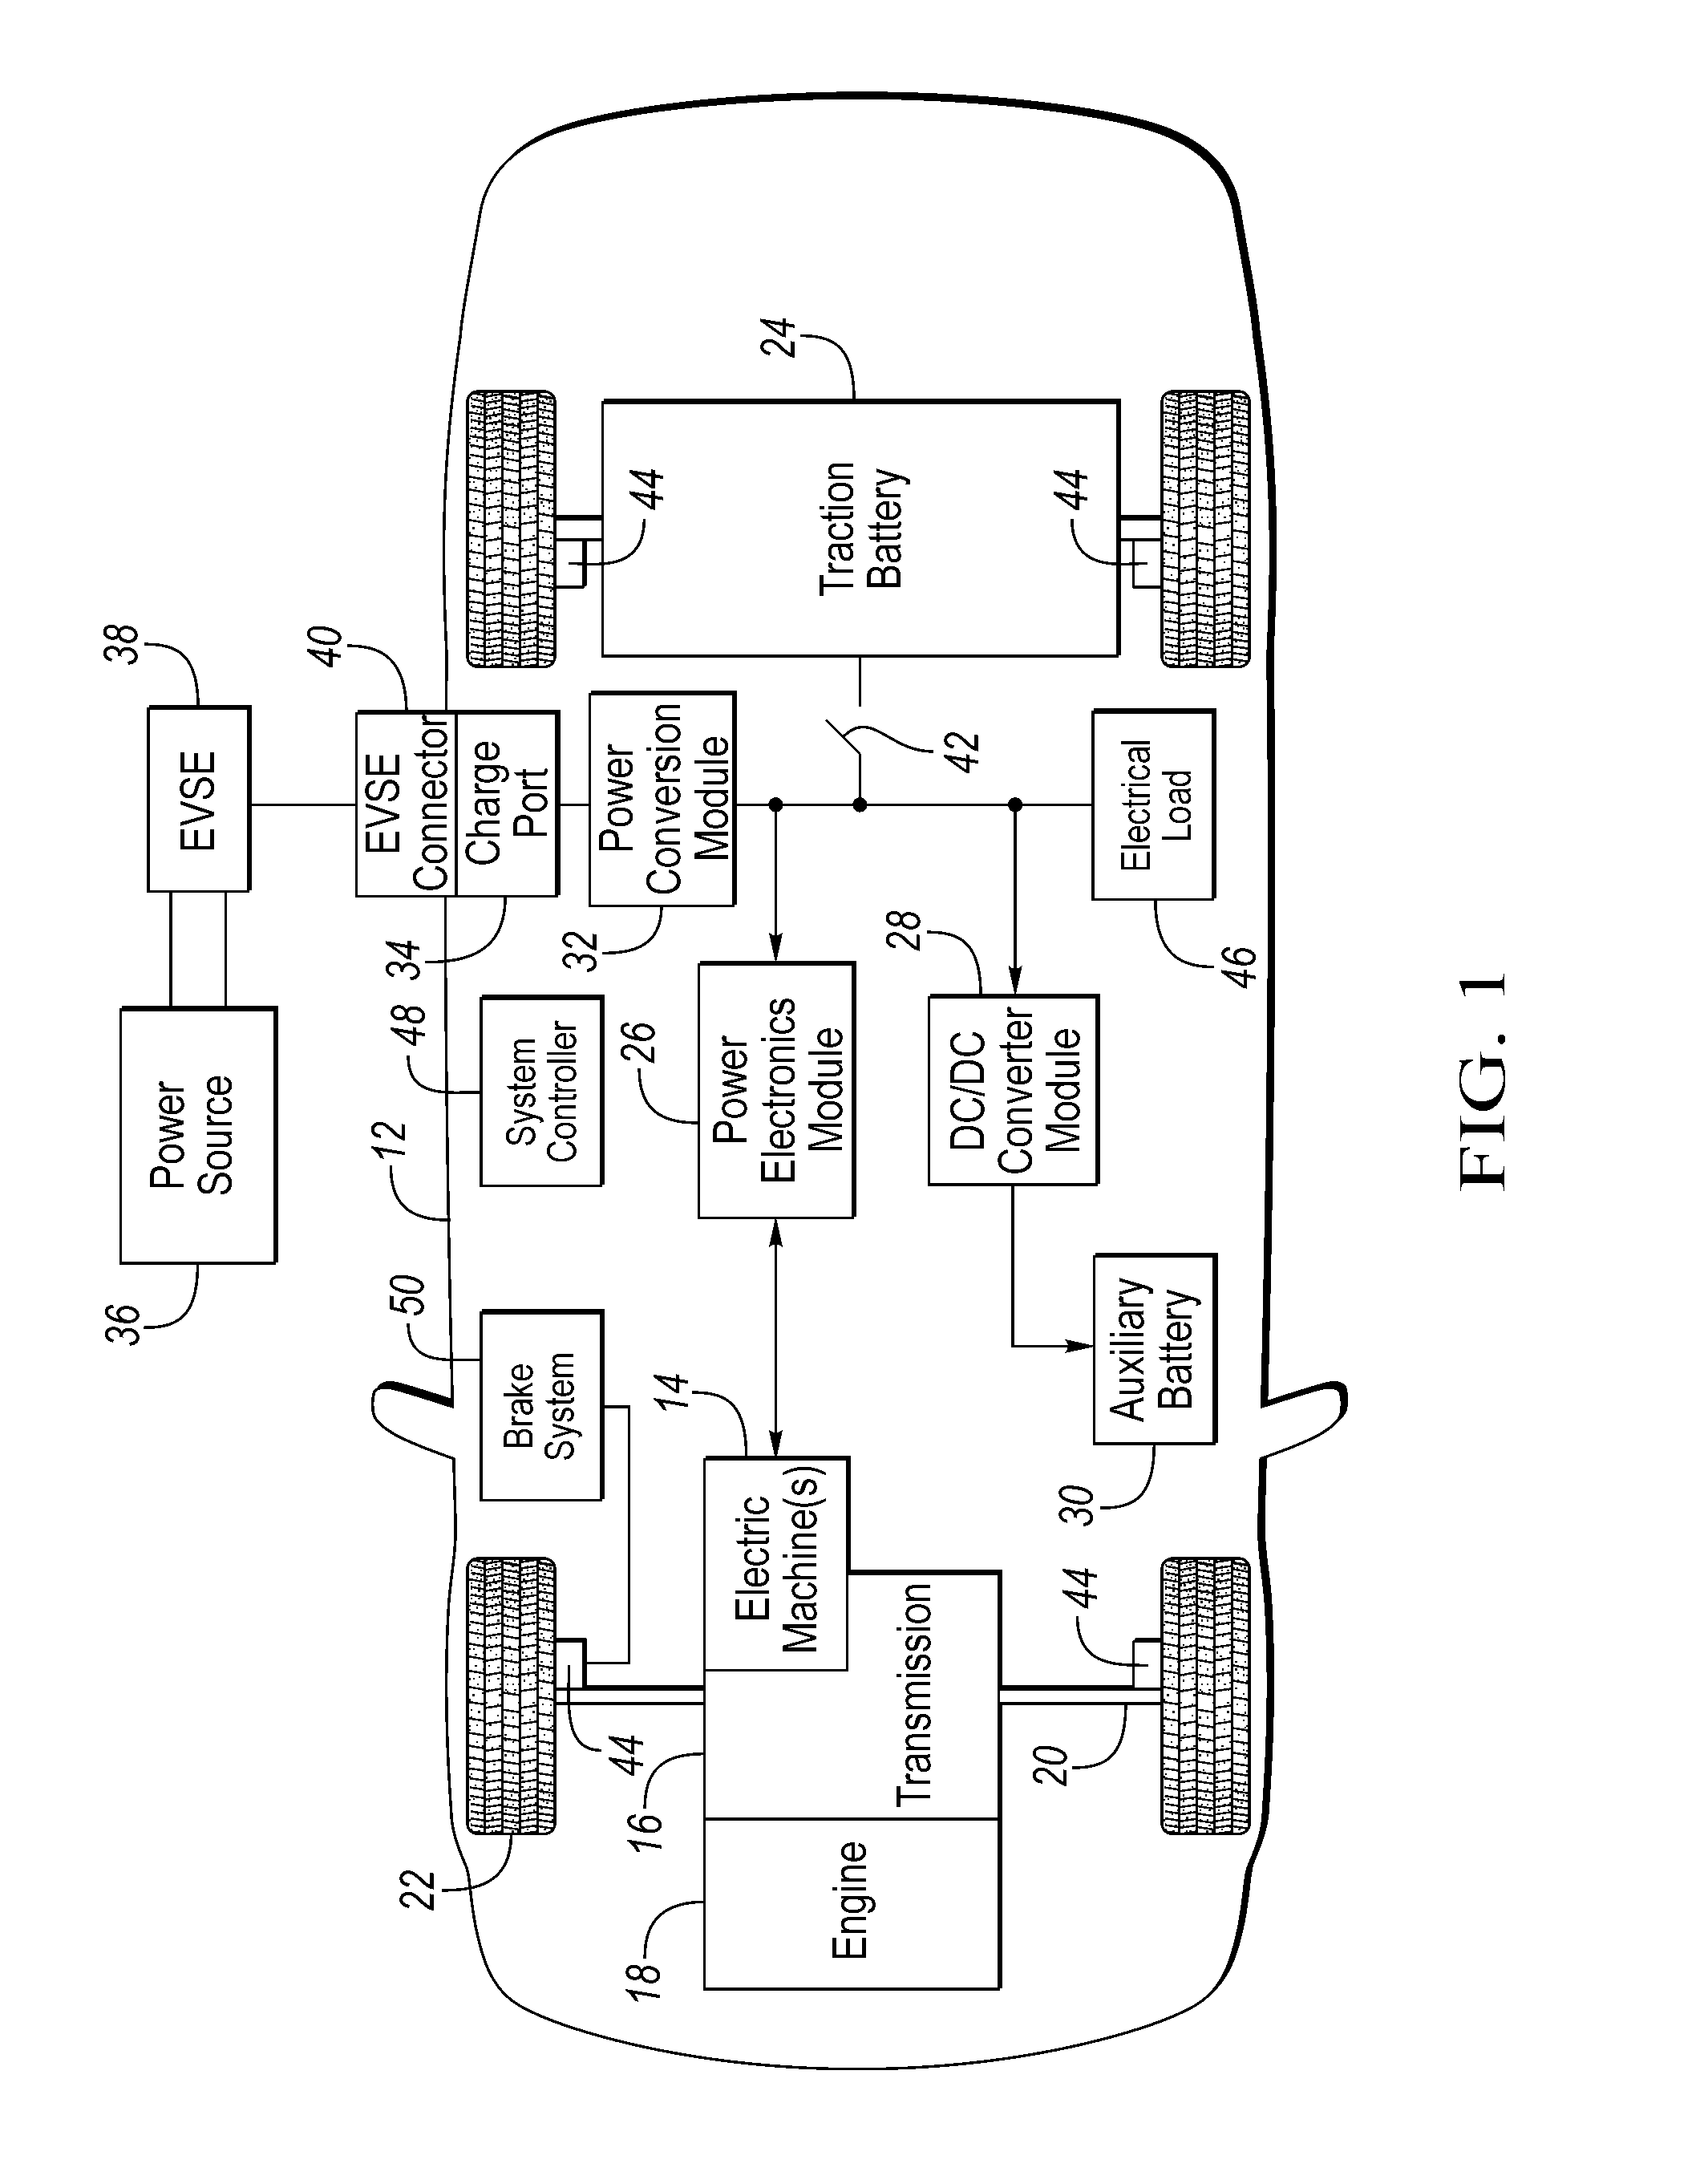 Method for Revitalizing and Increasing Lithium Ion Battery Capacity